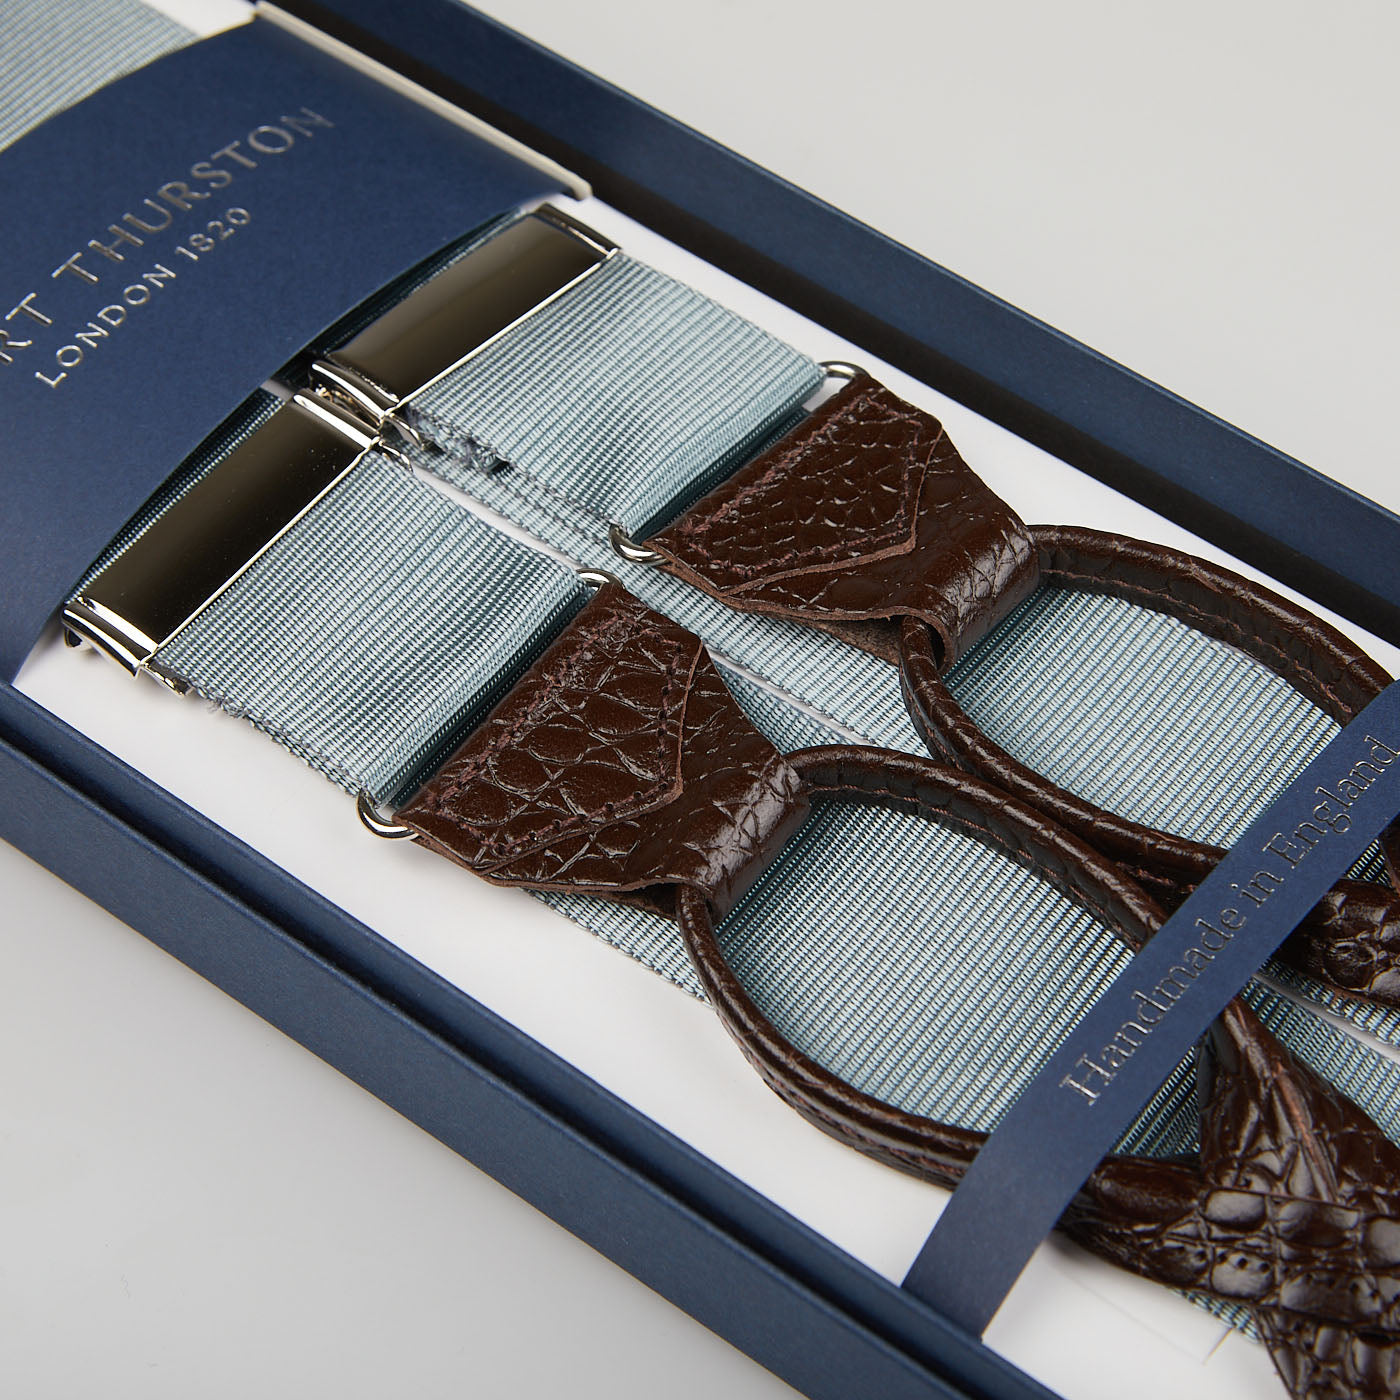 A pair of Dove Grey James Bond Nylon 35mm Braces, displayed in an open blue gift box with a navy lining featuring the British brand "Albert Thurston.